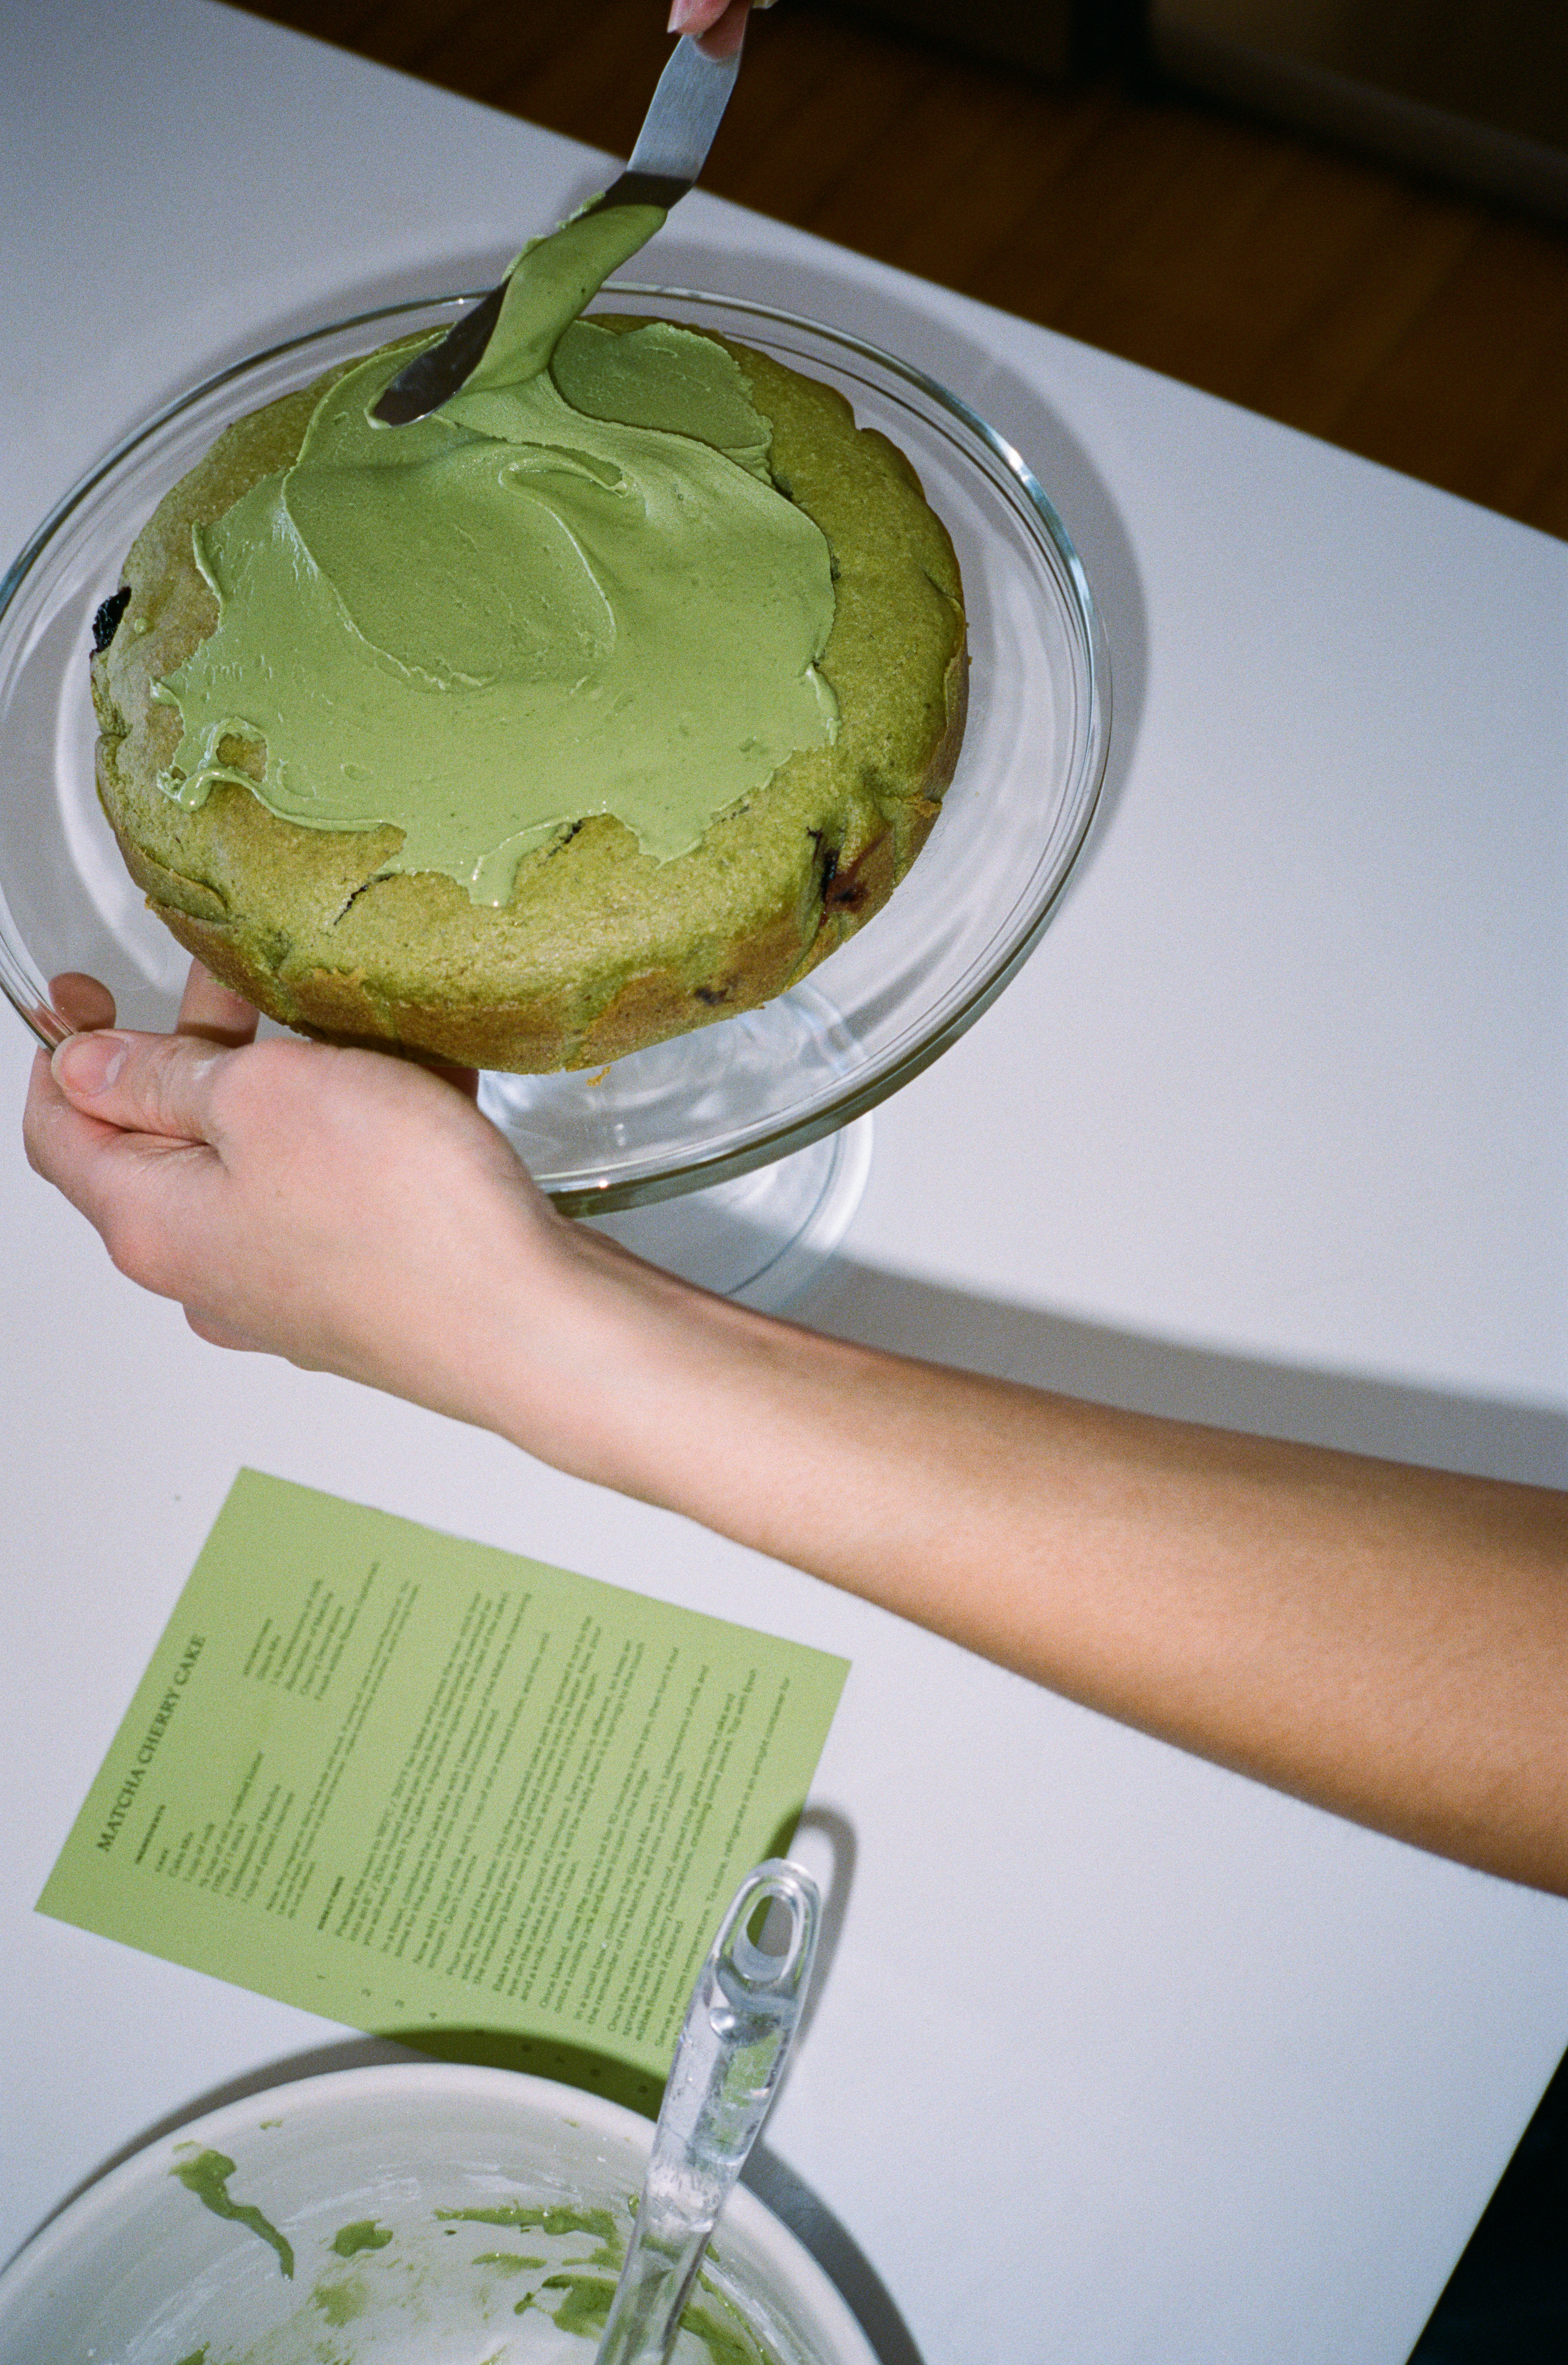 Limited Edition Matcha Cherry Cake Kit with TheaEditorial Image  of person making cake